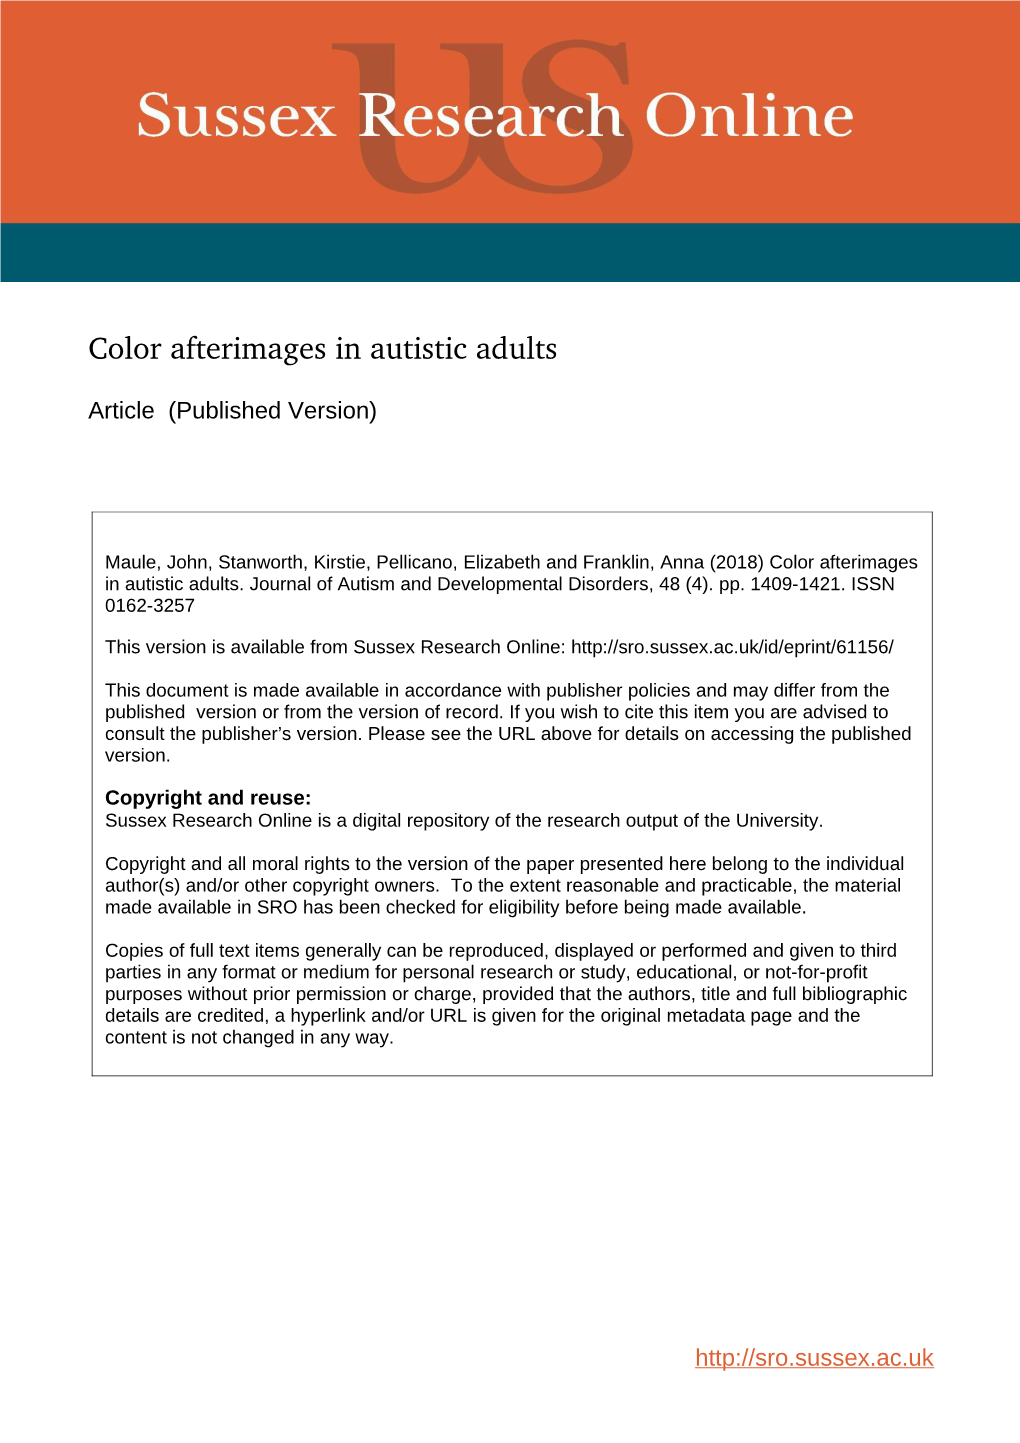 Color Afterimages in Autistic Adults